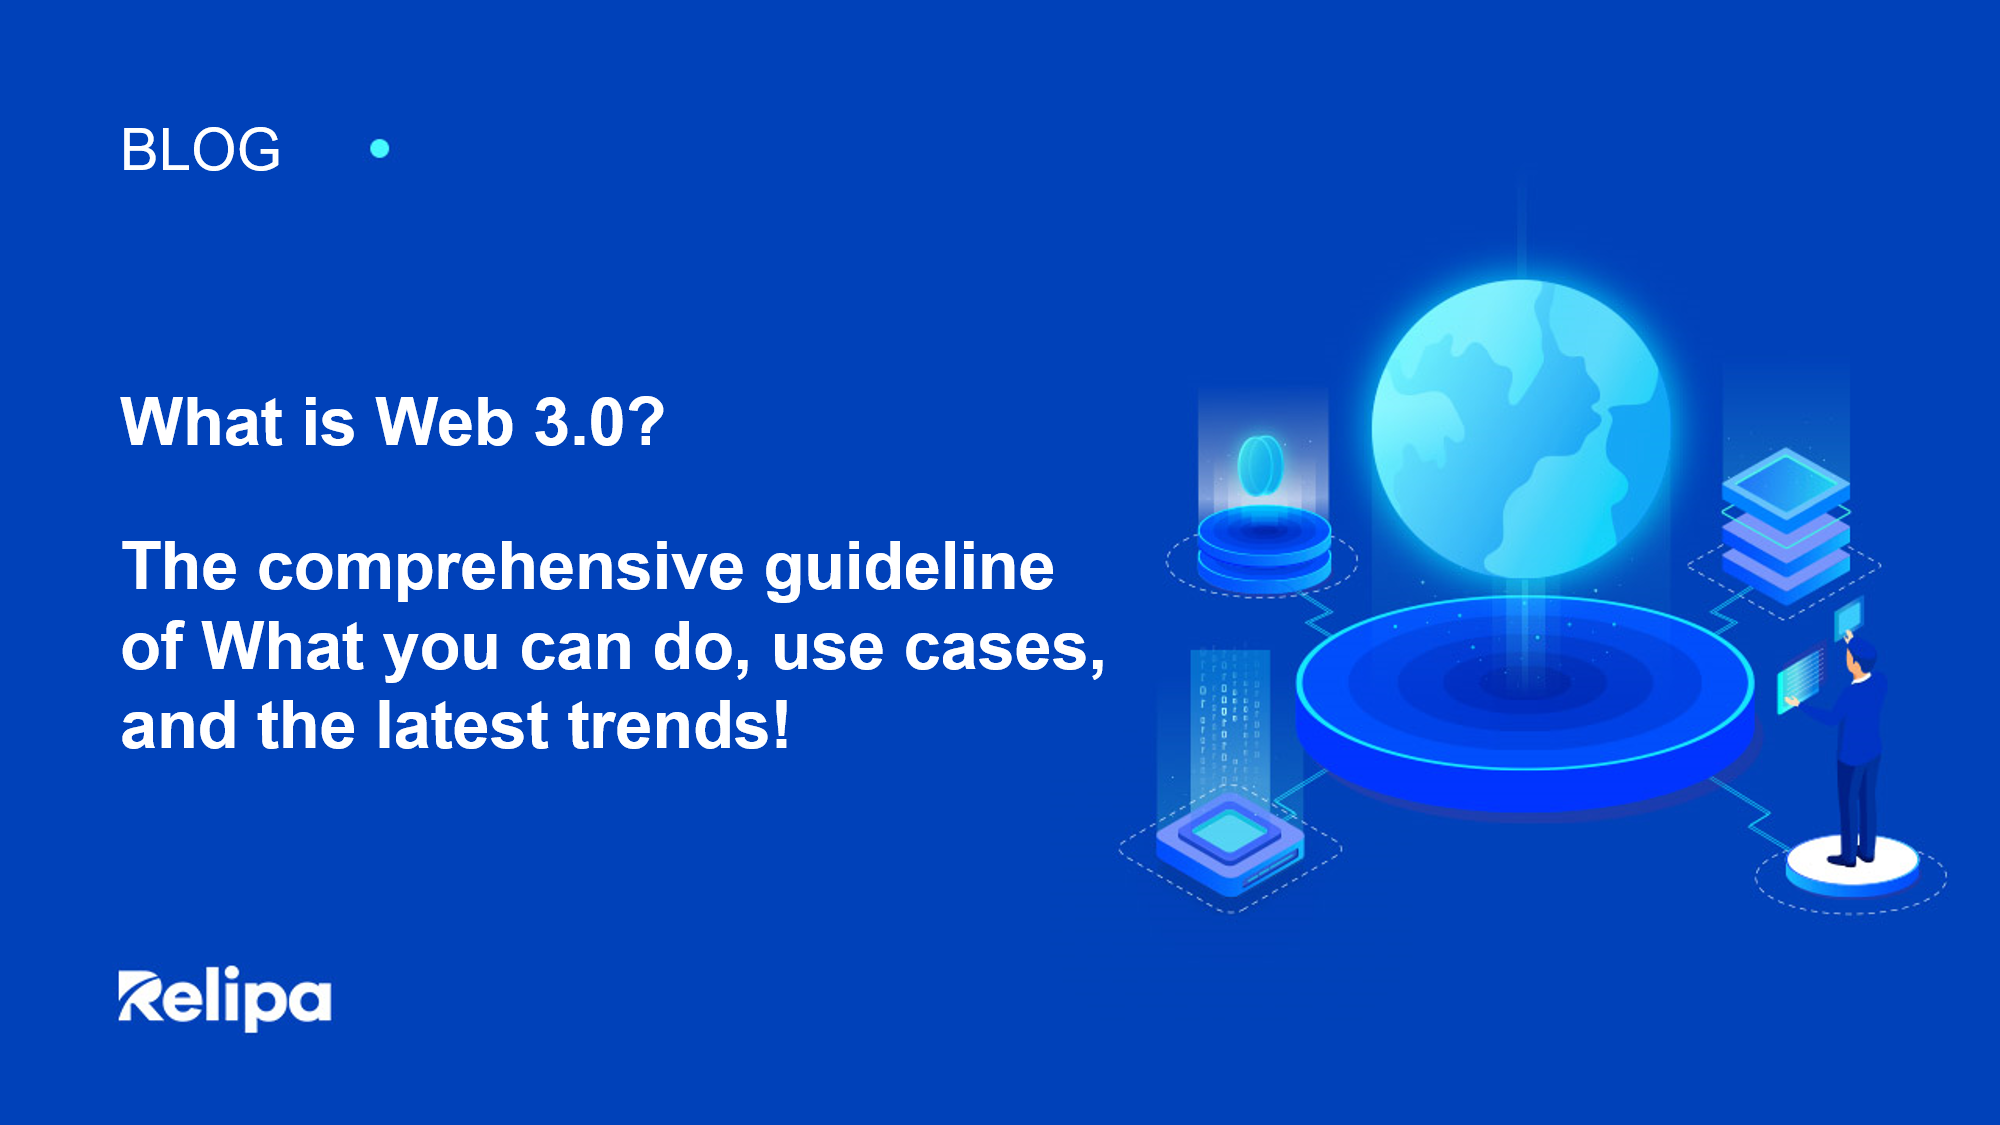 What is Web 3.0? The comprehensive guideline of what you can do, use cases, and the latest trends!